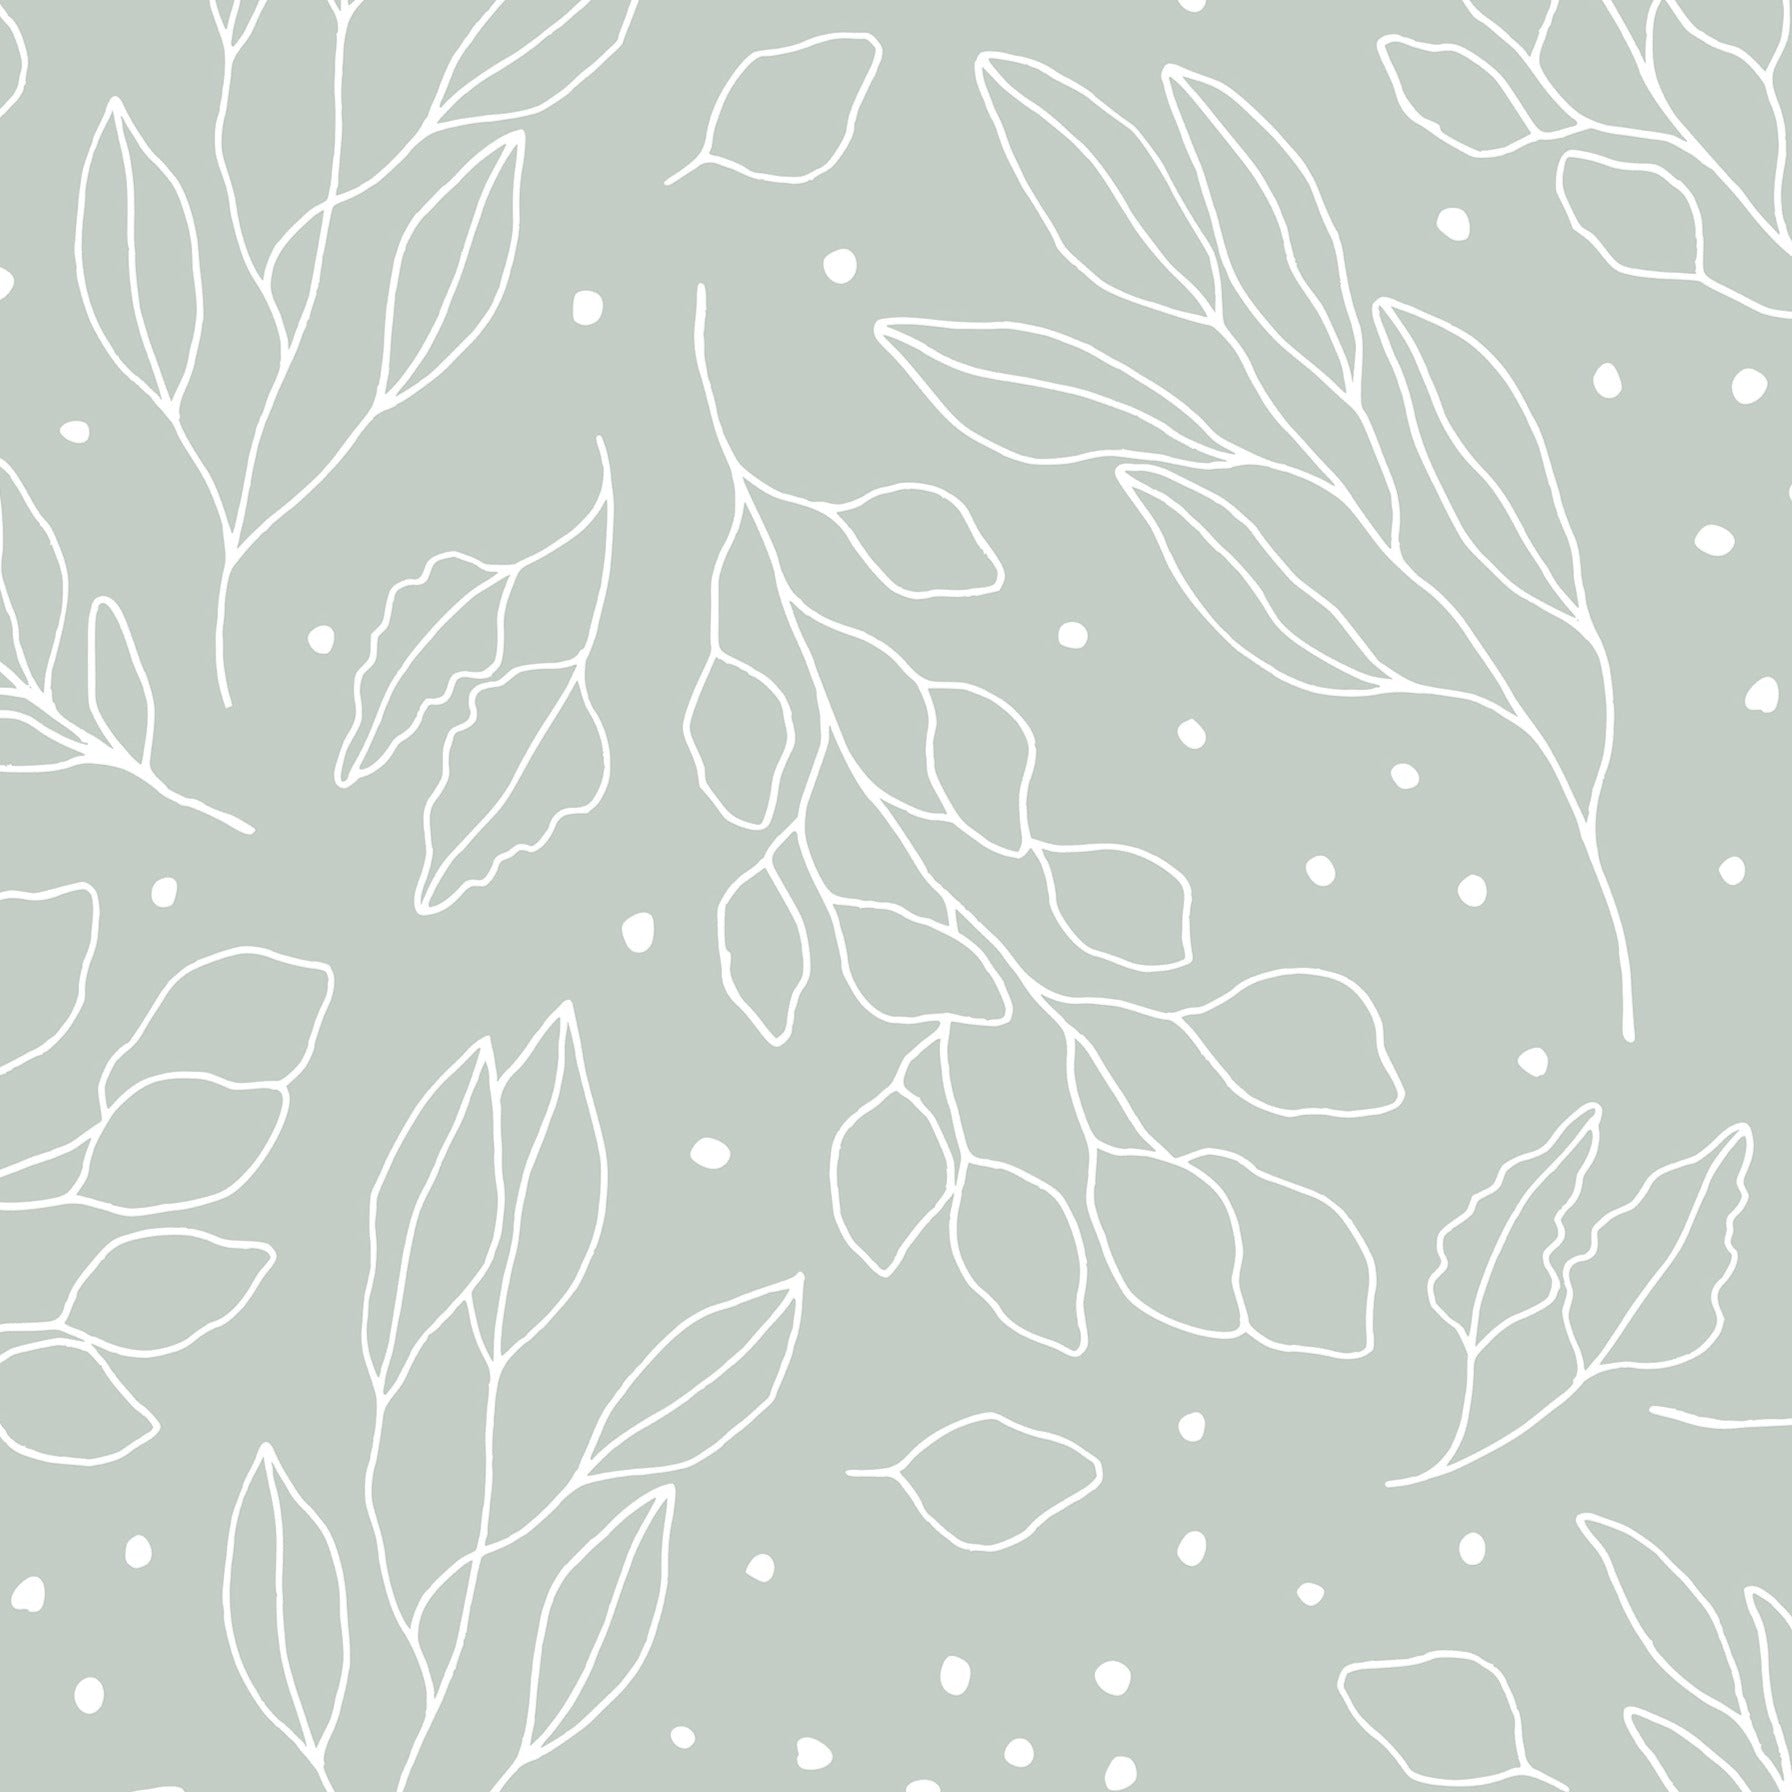 Detailed view of the Ferns and Leaves Wallpaper with a delicate and minimalist leaf design in light sage green. The pattern is interspersed with tiny white dots, adding a touch of whimsy to the serene backdrop.